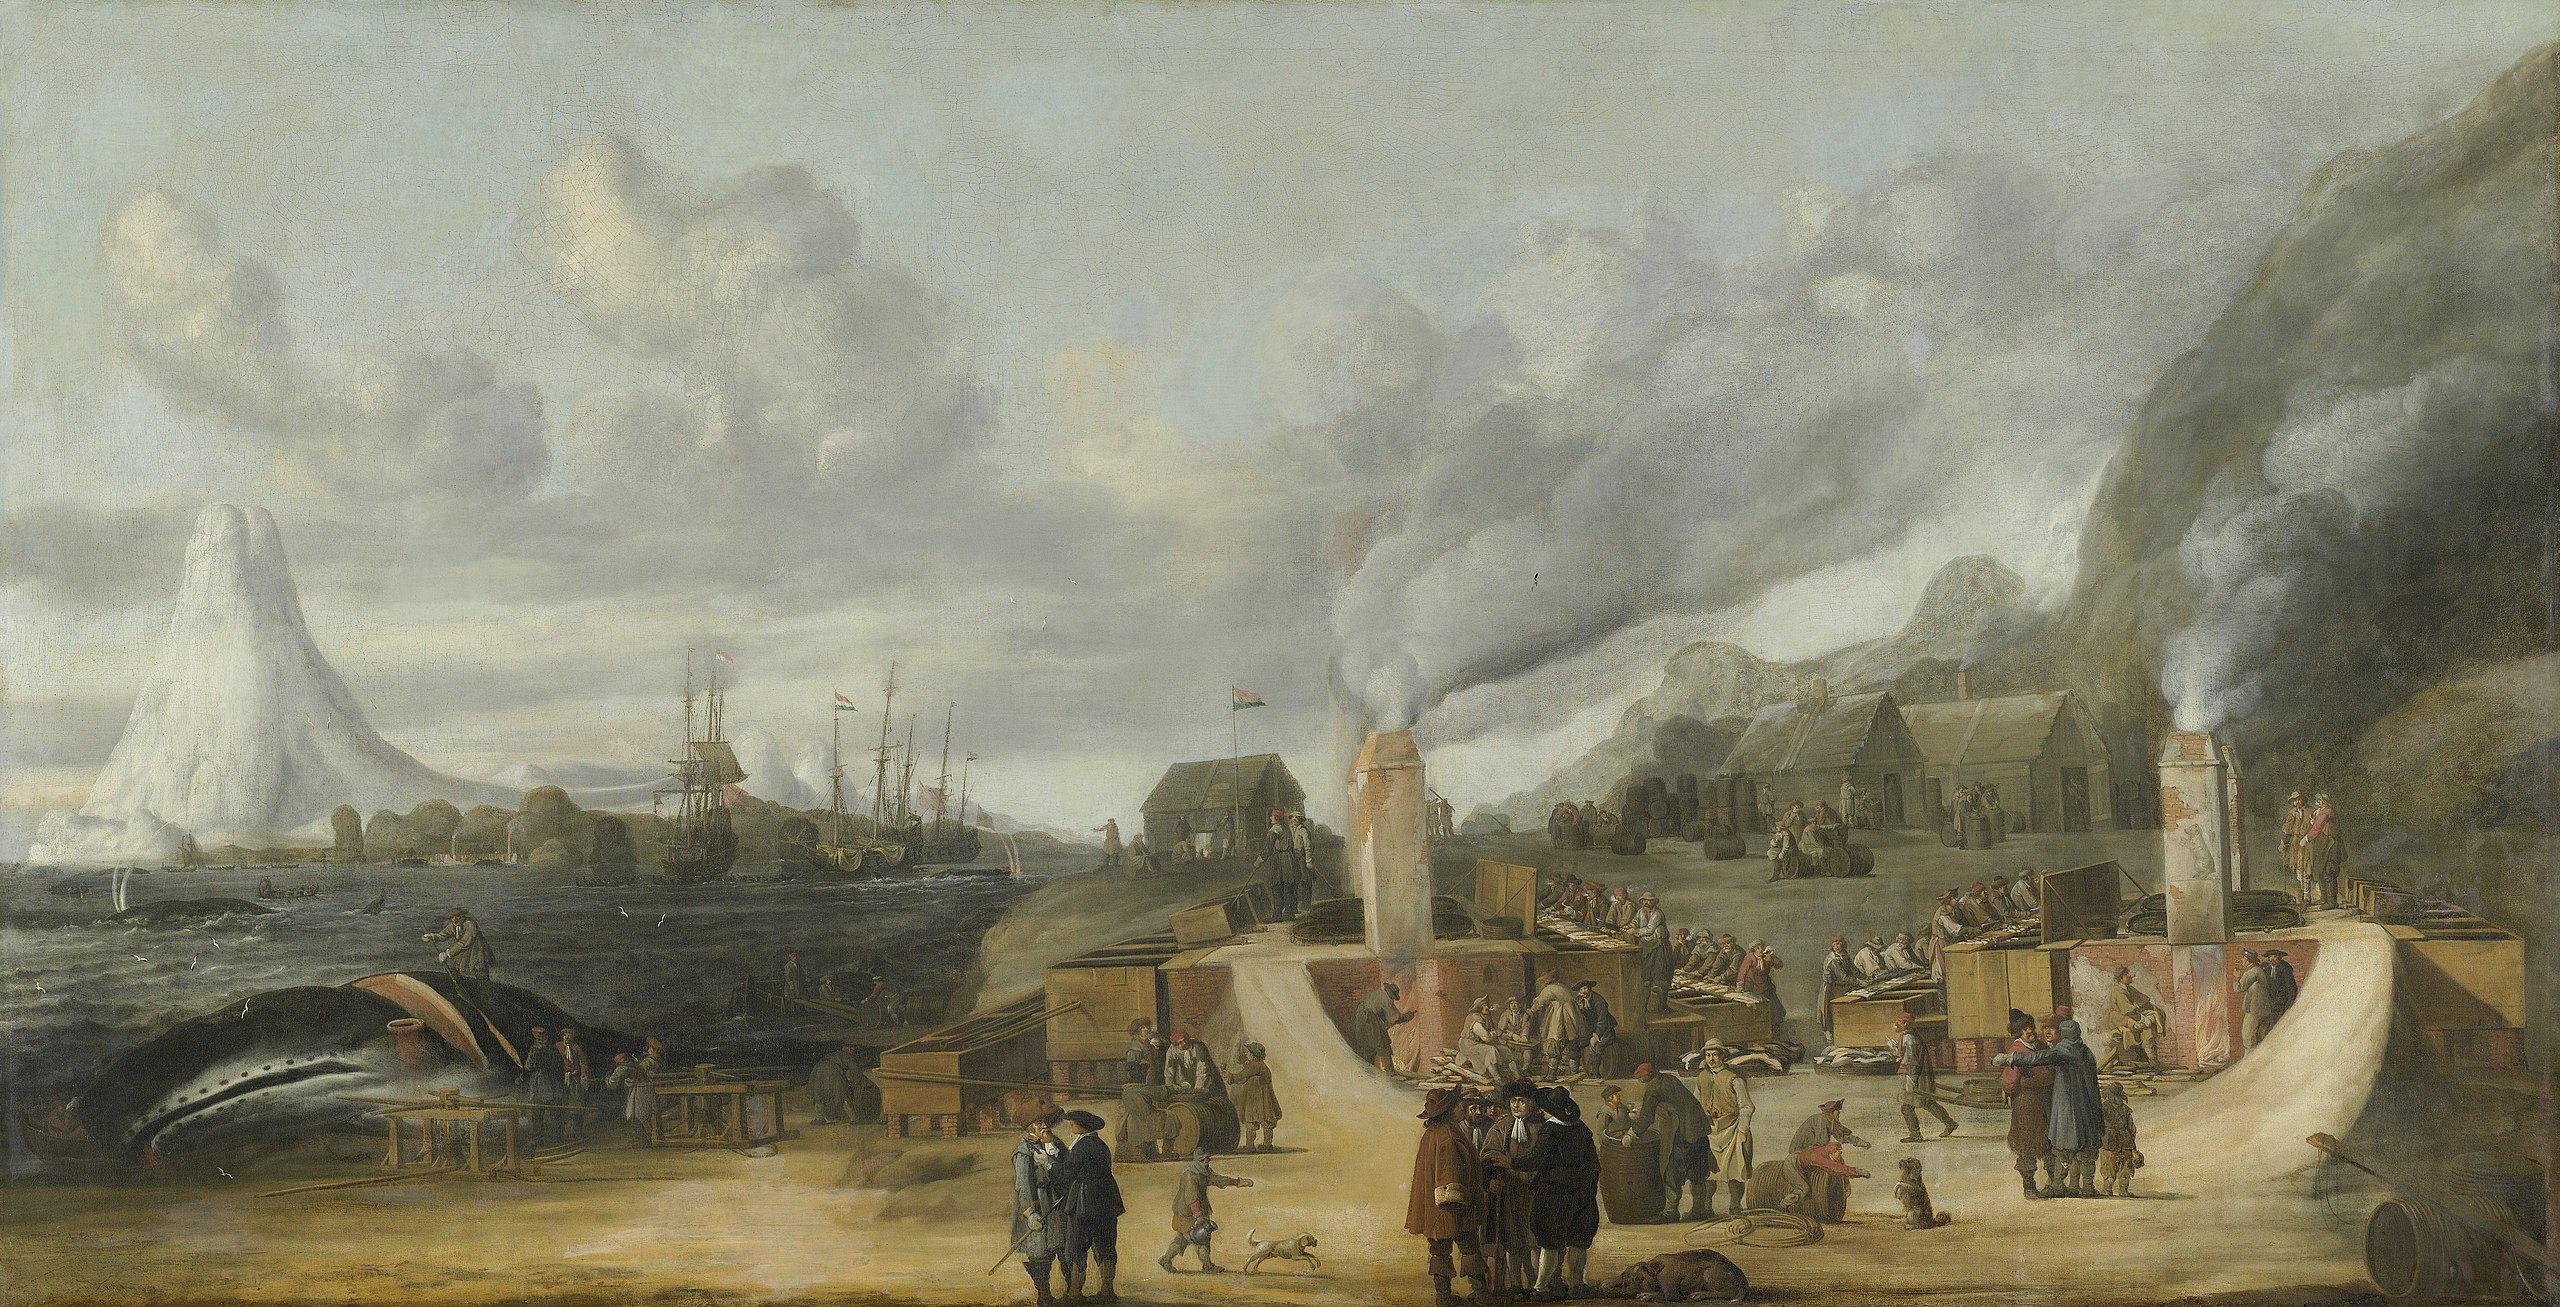 Impression of the Smeerenburg refinery by Cornelis de Man (1639). De Man based his image on stories and other drawings, he was never at Spitsbergen. Rijksmuseum, Amsterdam.